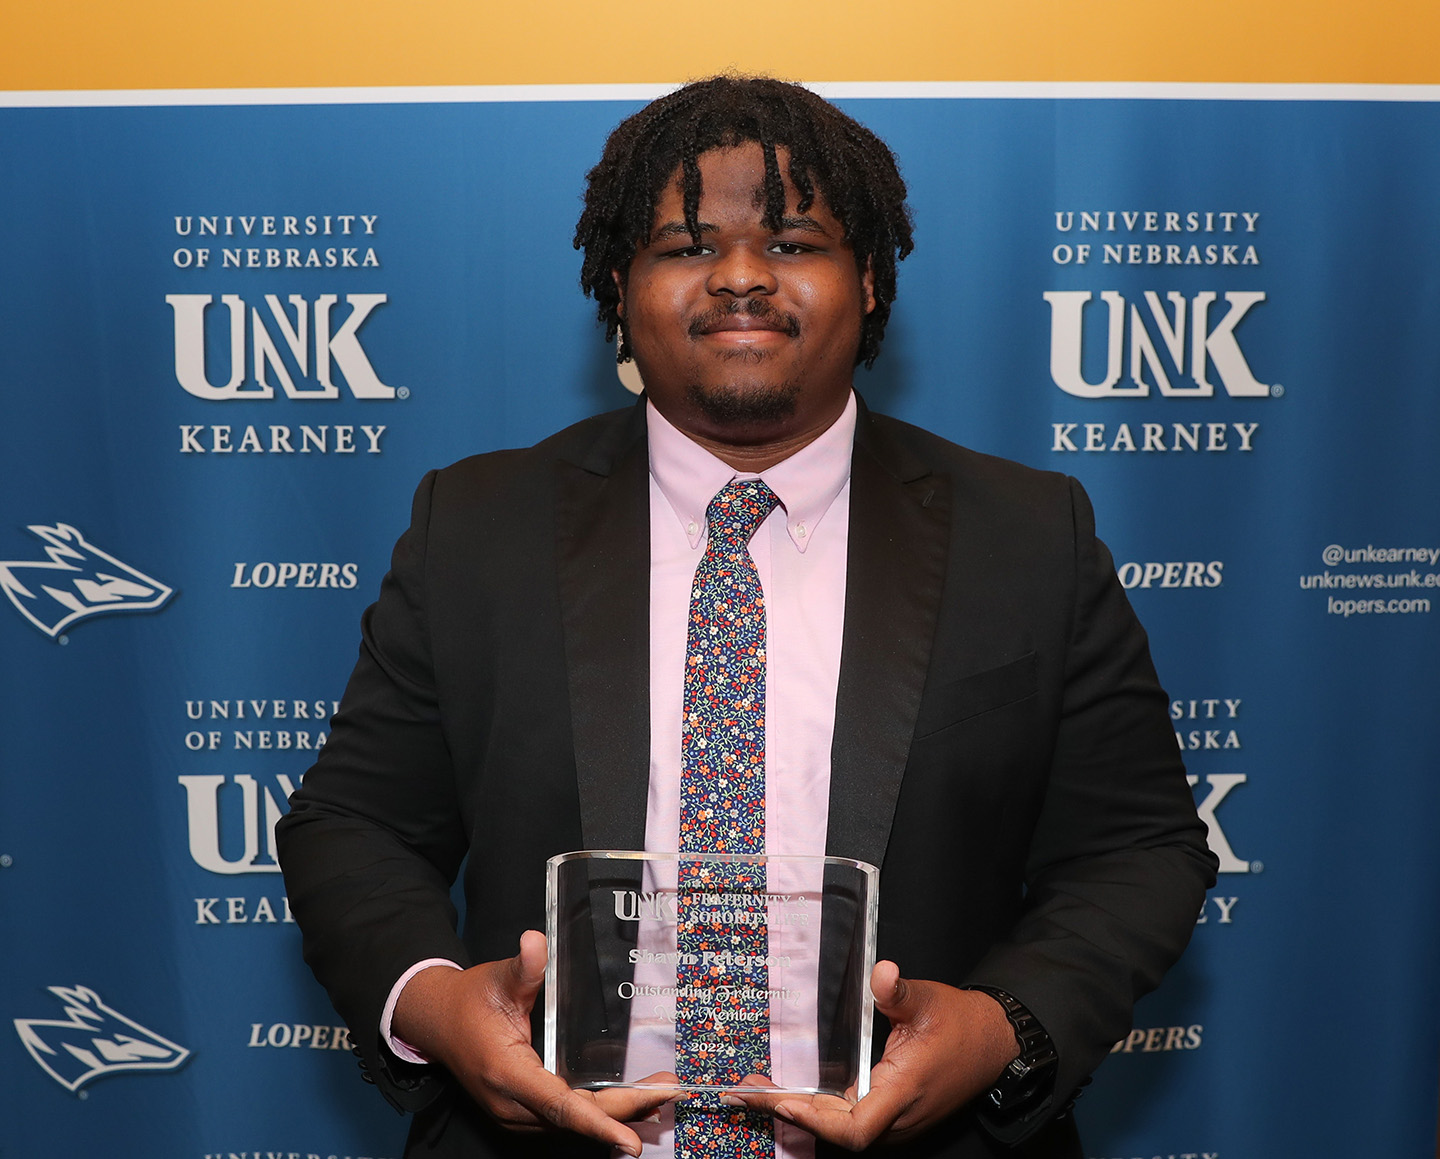 Shawn Peterson was named the Outstanding Fraternity New Member during last year’s Fraternity and Sorority Life awards banquet. (Photo by Erika Pritchard, UNK Communications)